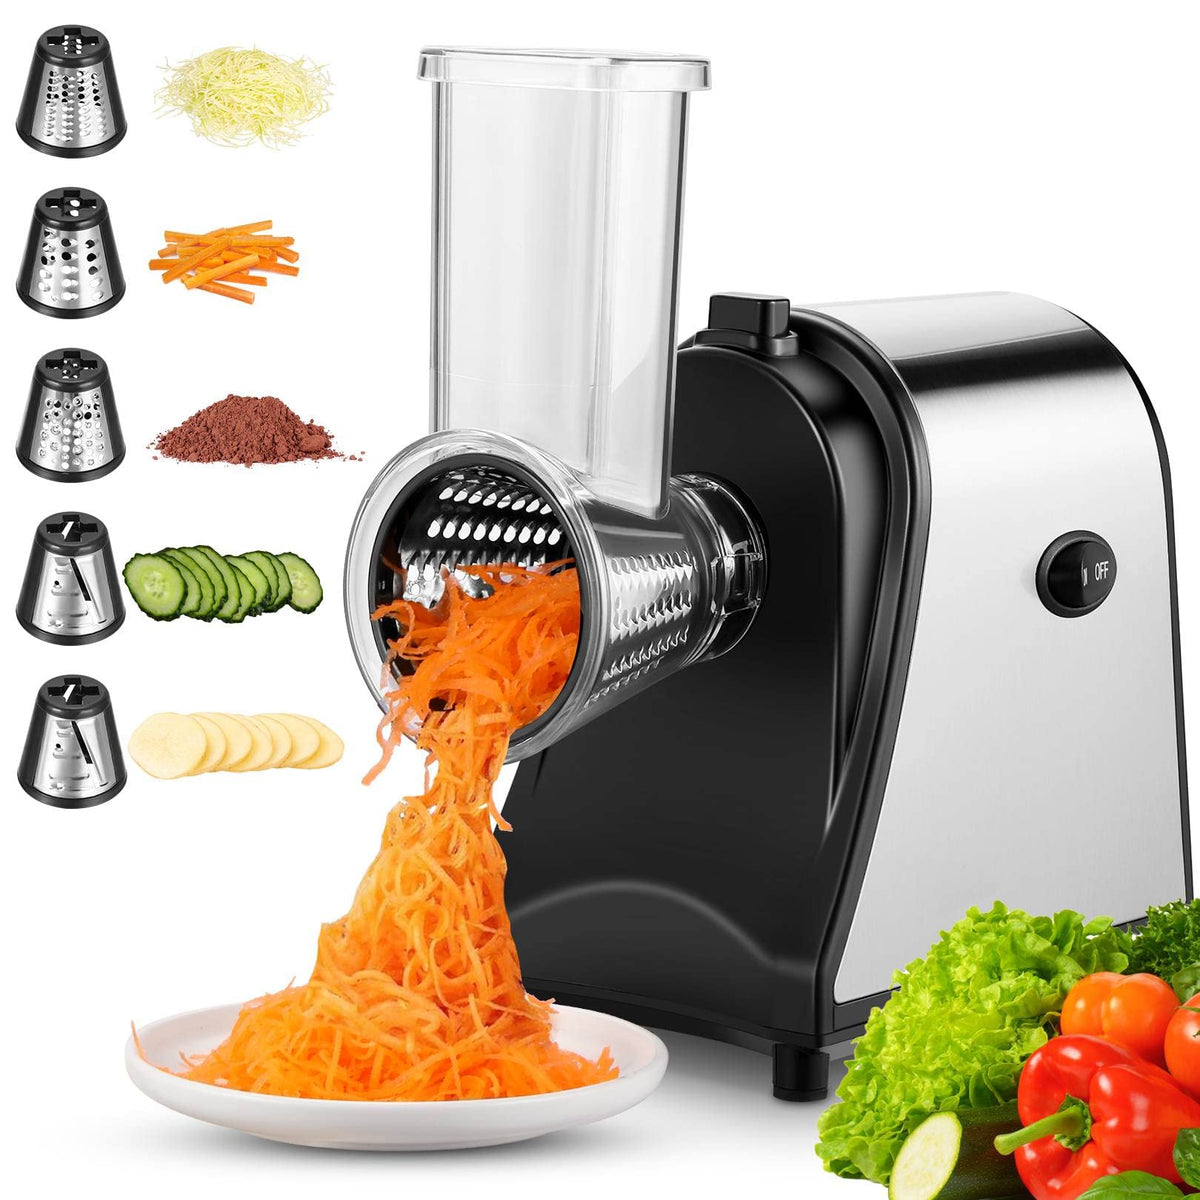 Electric Cheese Grater, 250W Multifunctional Vegetable Cutter for Home Use,  5 Stainless Steel Rotary Blades and One-Touch Control, Electric Salad